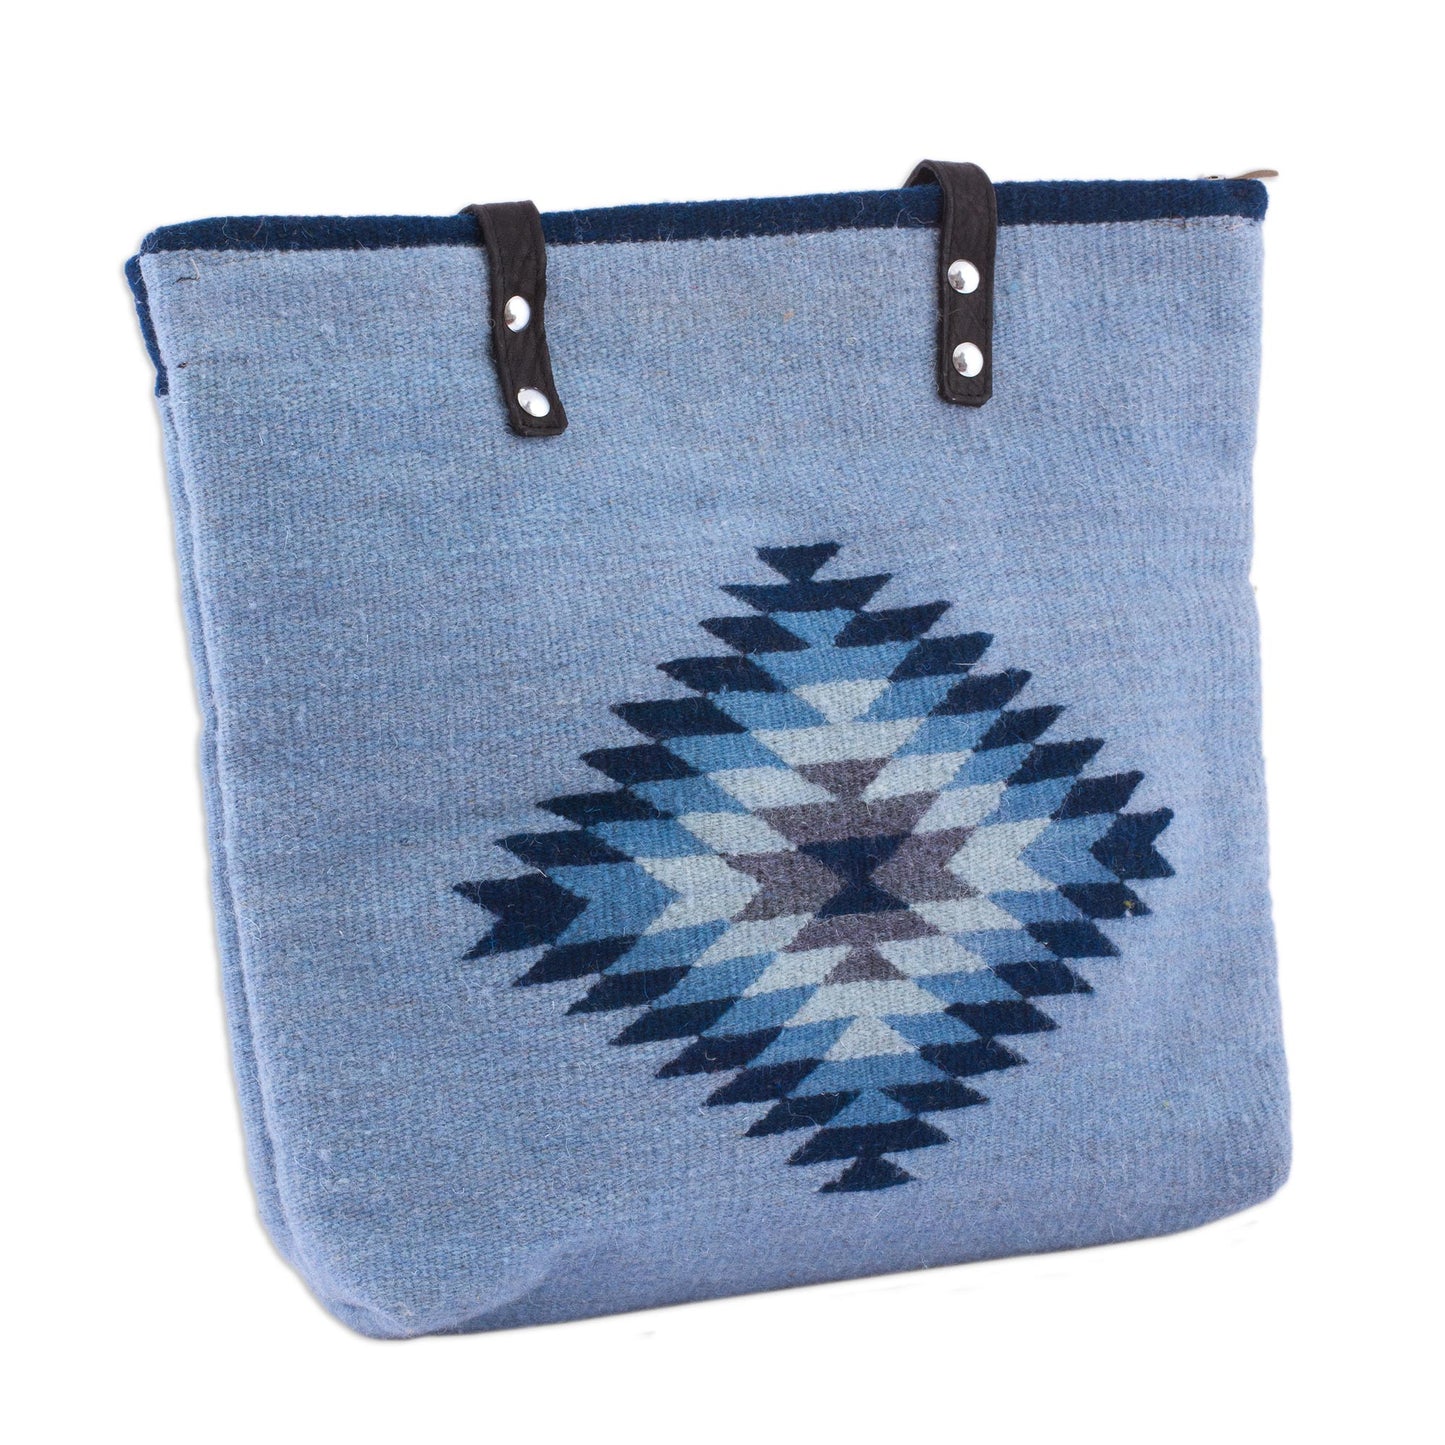 'Mexican Sky' Blue Wool and Leather Accent Tote Handbag